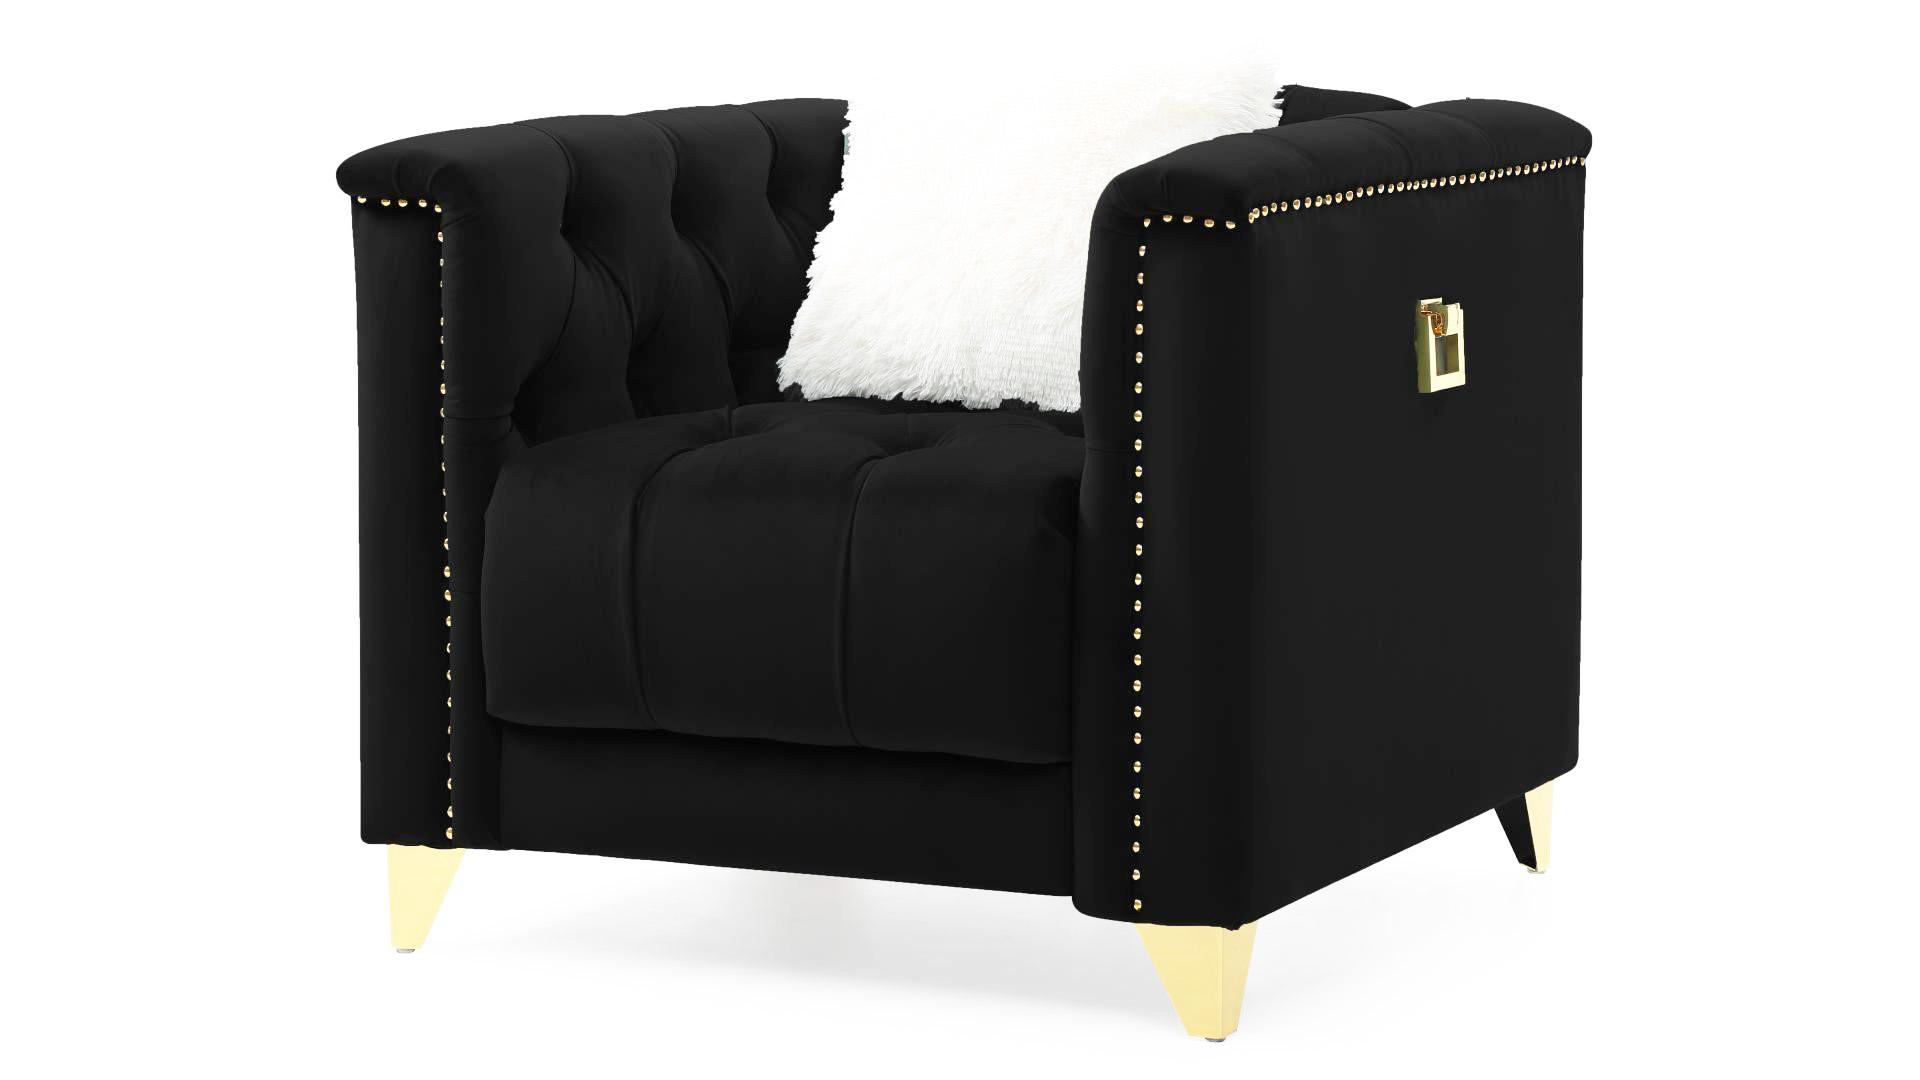 

    
RUSSELL-BK-S-3PC Black Velvet Crystal Tufted Sofa Set 3Pc RUSSELL Galaxy Home Contemporary Modern
